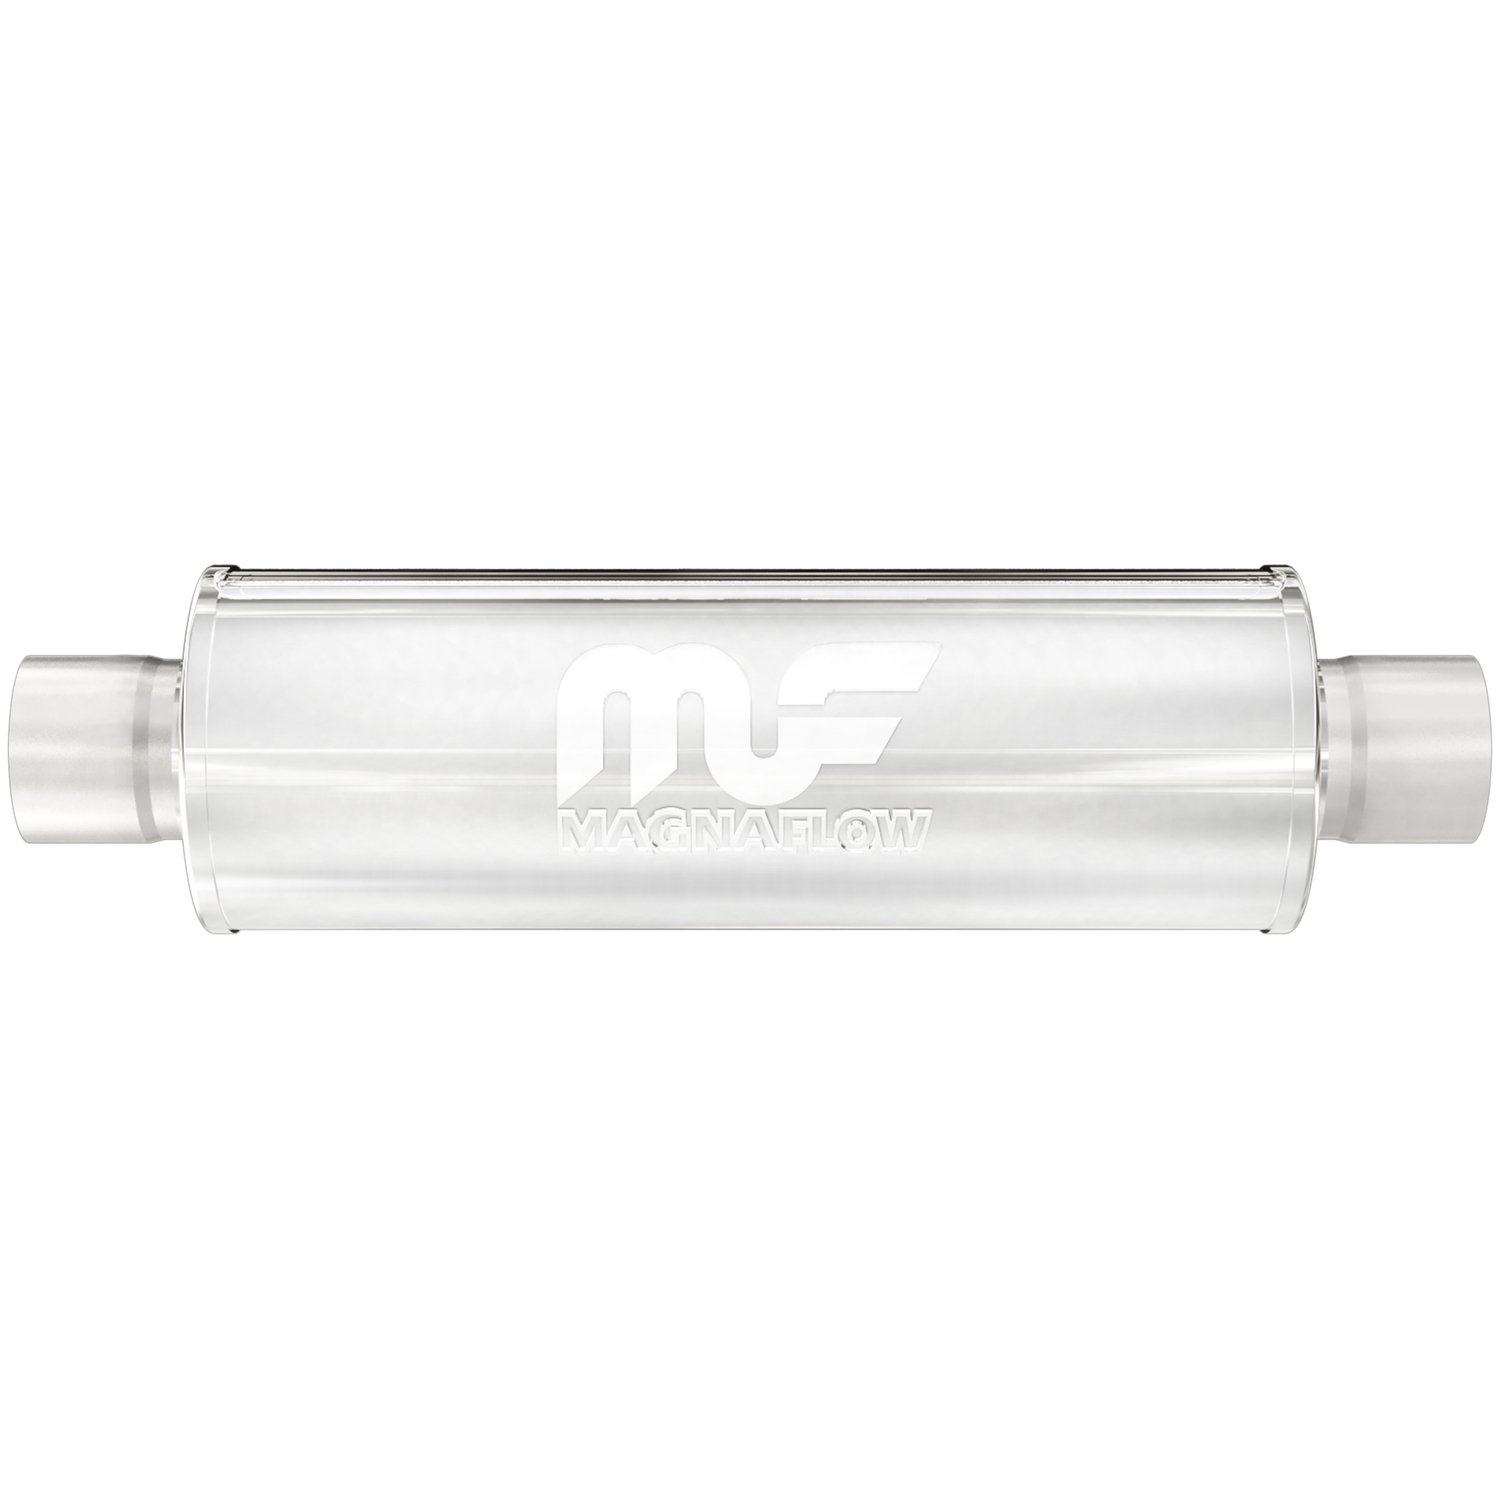 6" Round Muffler Center In/Center Out: 2" Body Length: 18" Overall Length: 24" Core Size: 2.5" Satin Finish